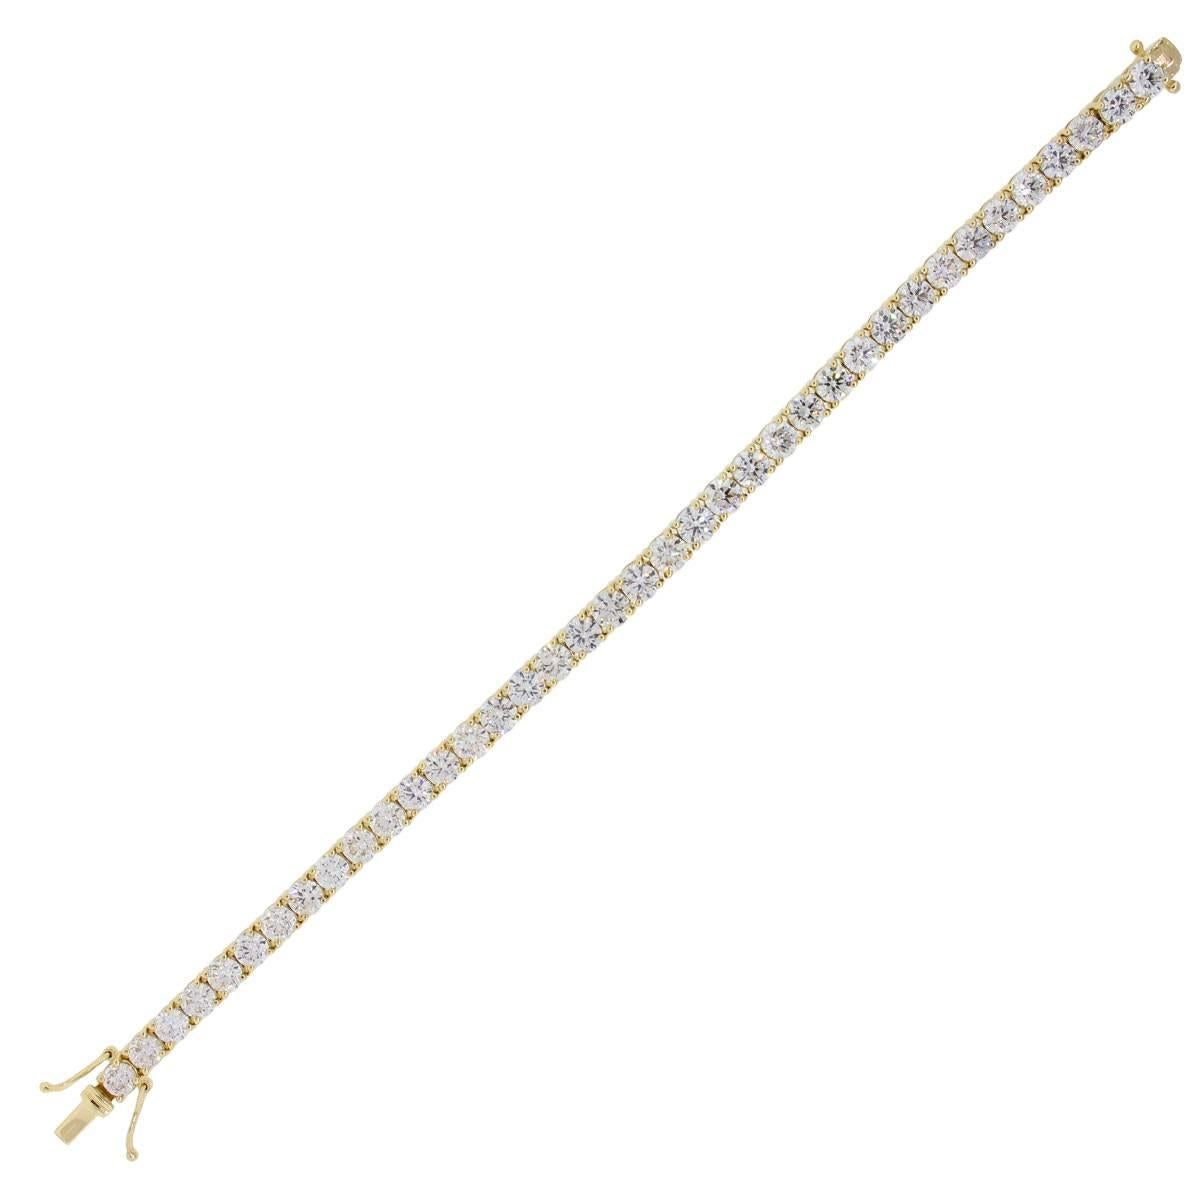 Material: 14k yellow gold
Diamond Details: Approximately 13.03ctw of round brilliant diamonds. Diamonds are H in color and VS-SI in clarity. 38 diamonds total
Clasp: Tongue in box clasp with safety latch
Measurements: Will fit a 7.25″ wrist and is